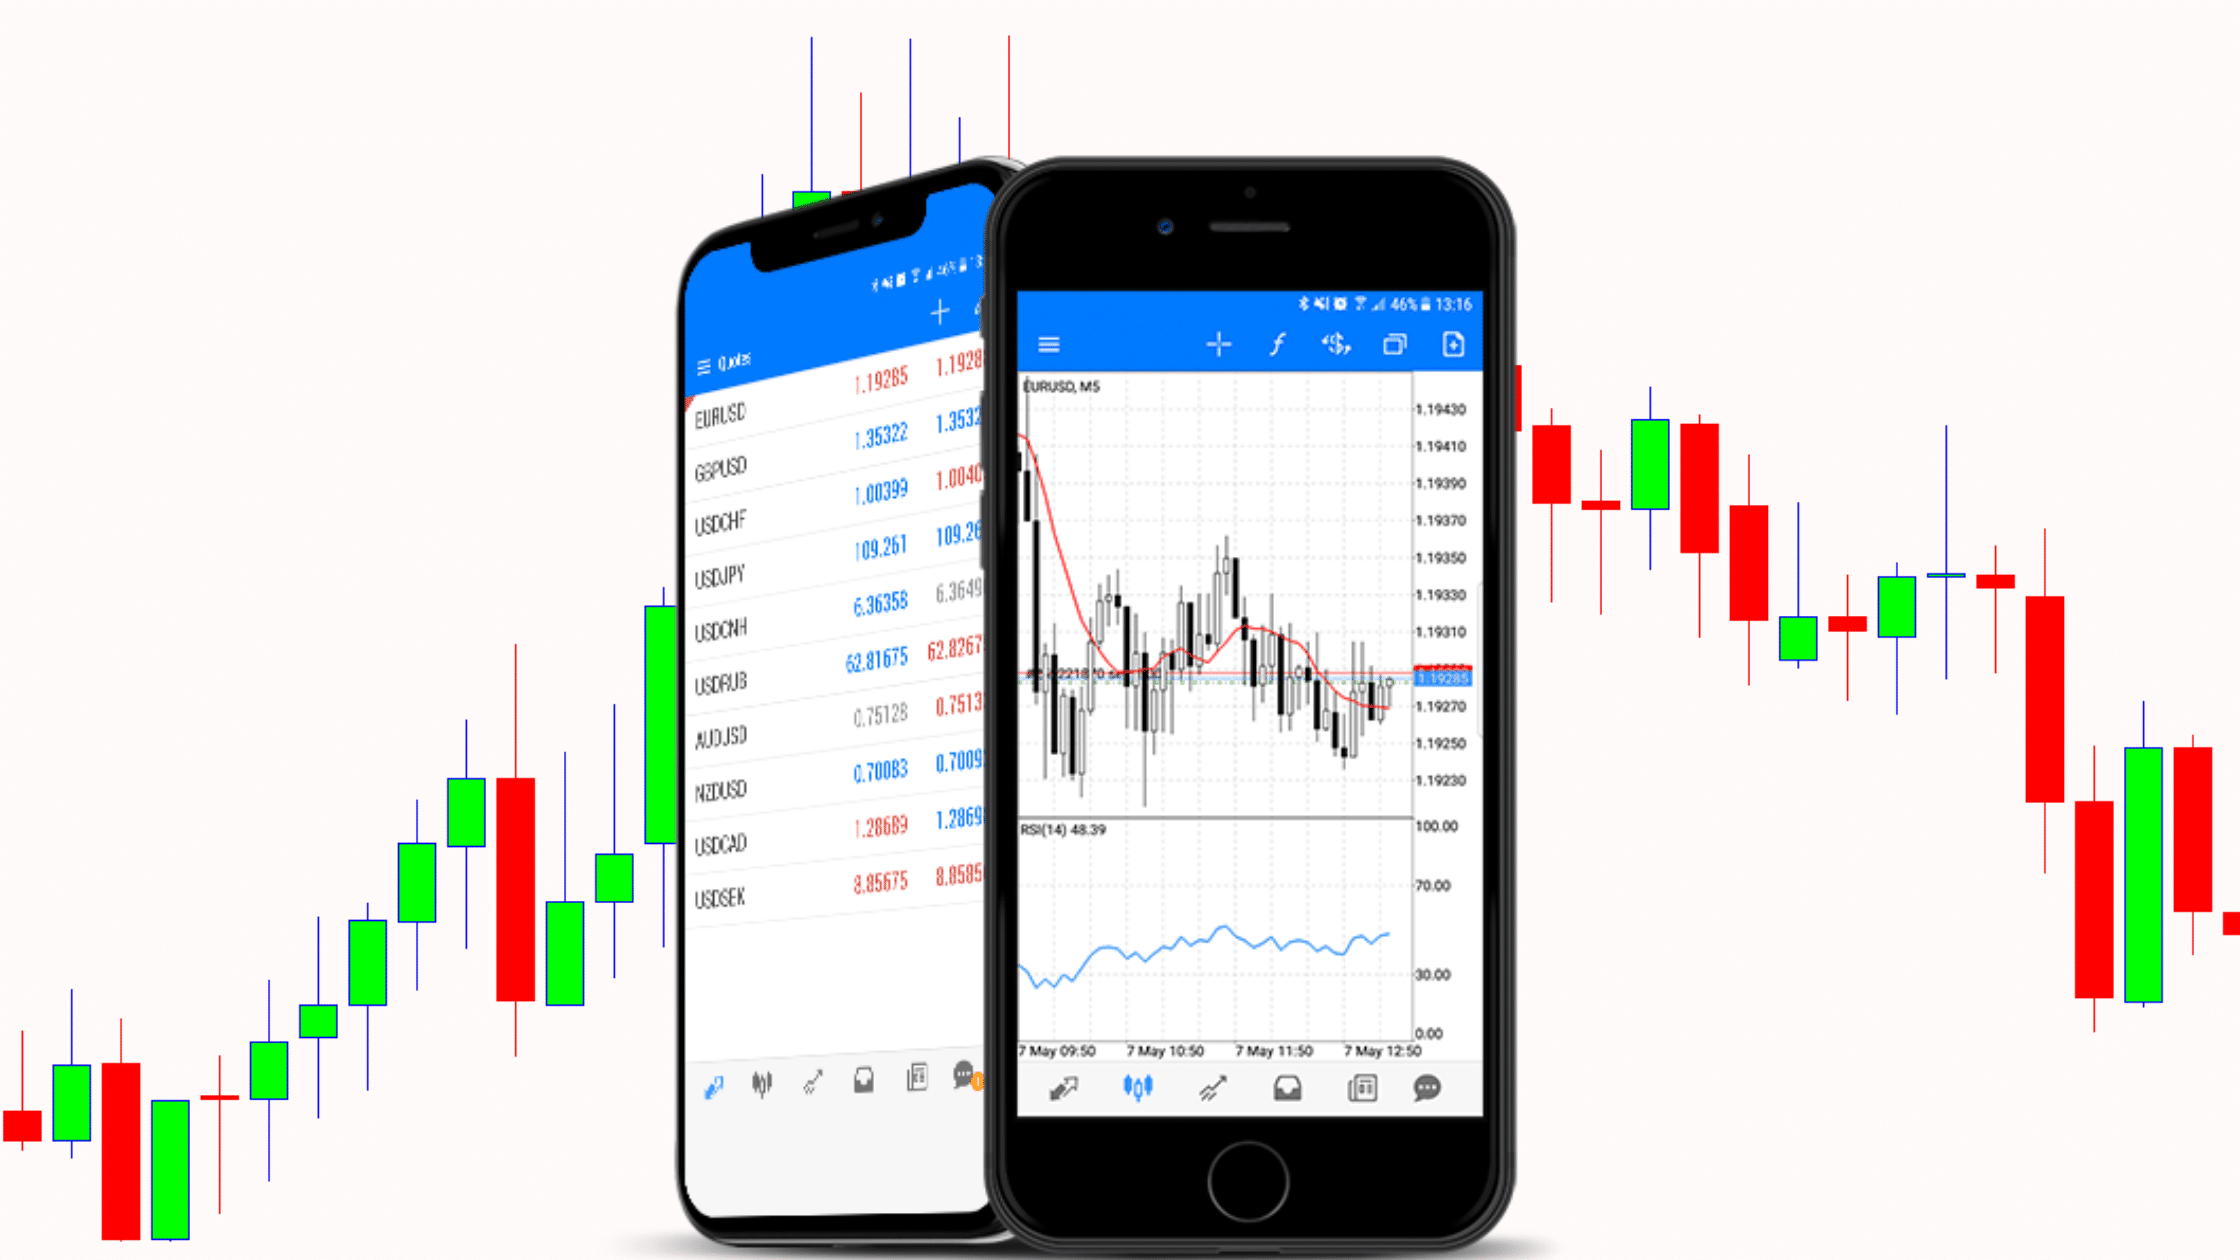 Forex Trading Apps